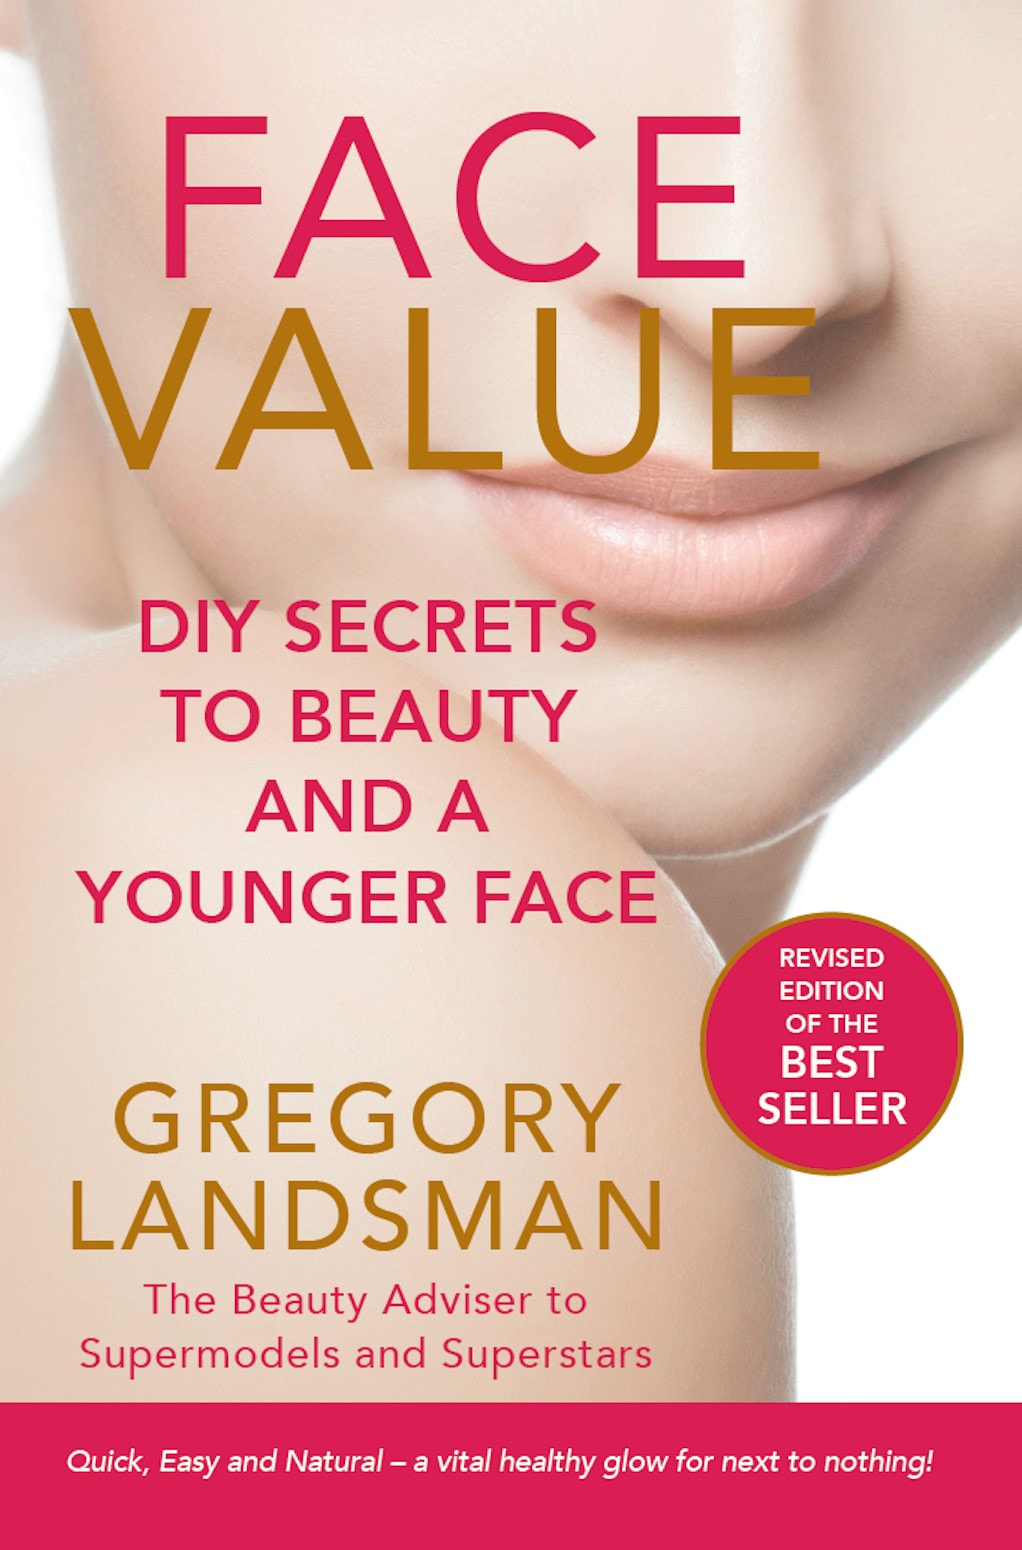 FACE VALUE - DIY Secrets to Beauty and a Younger Face by Gregory Landsman